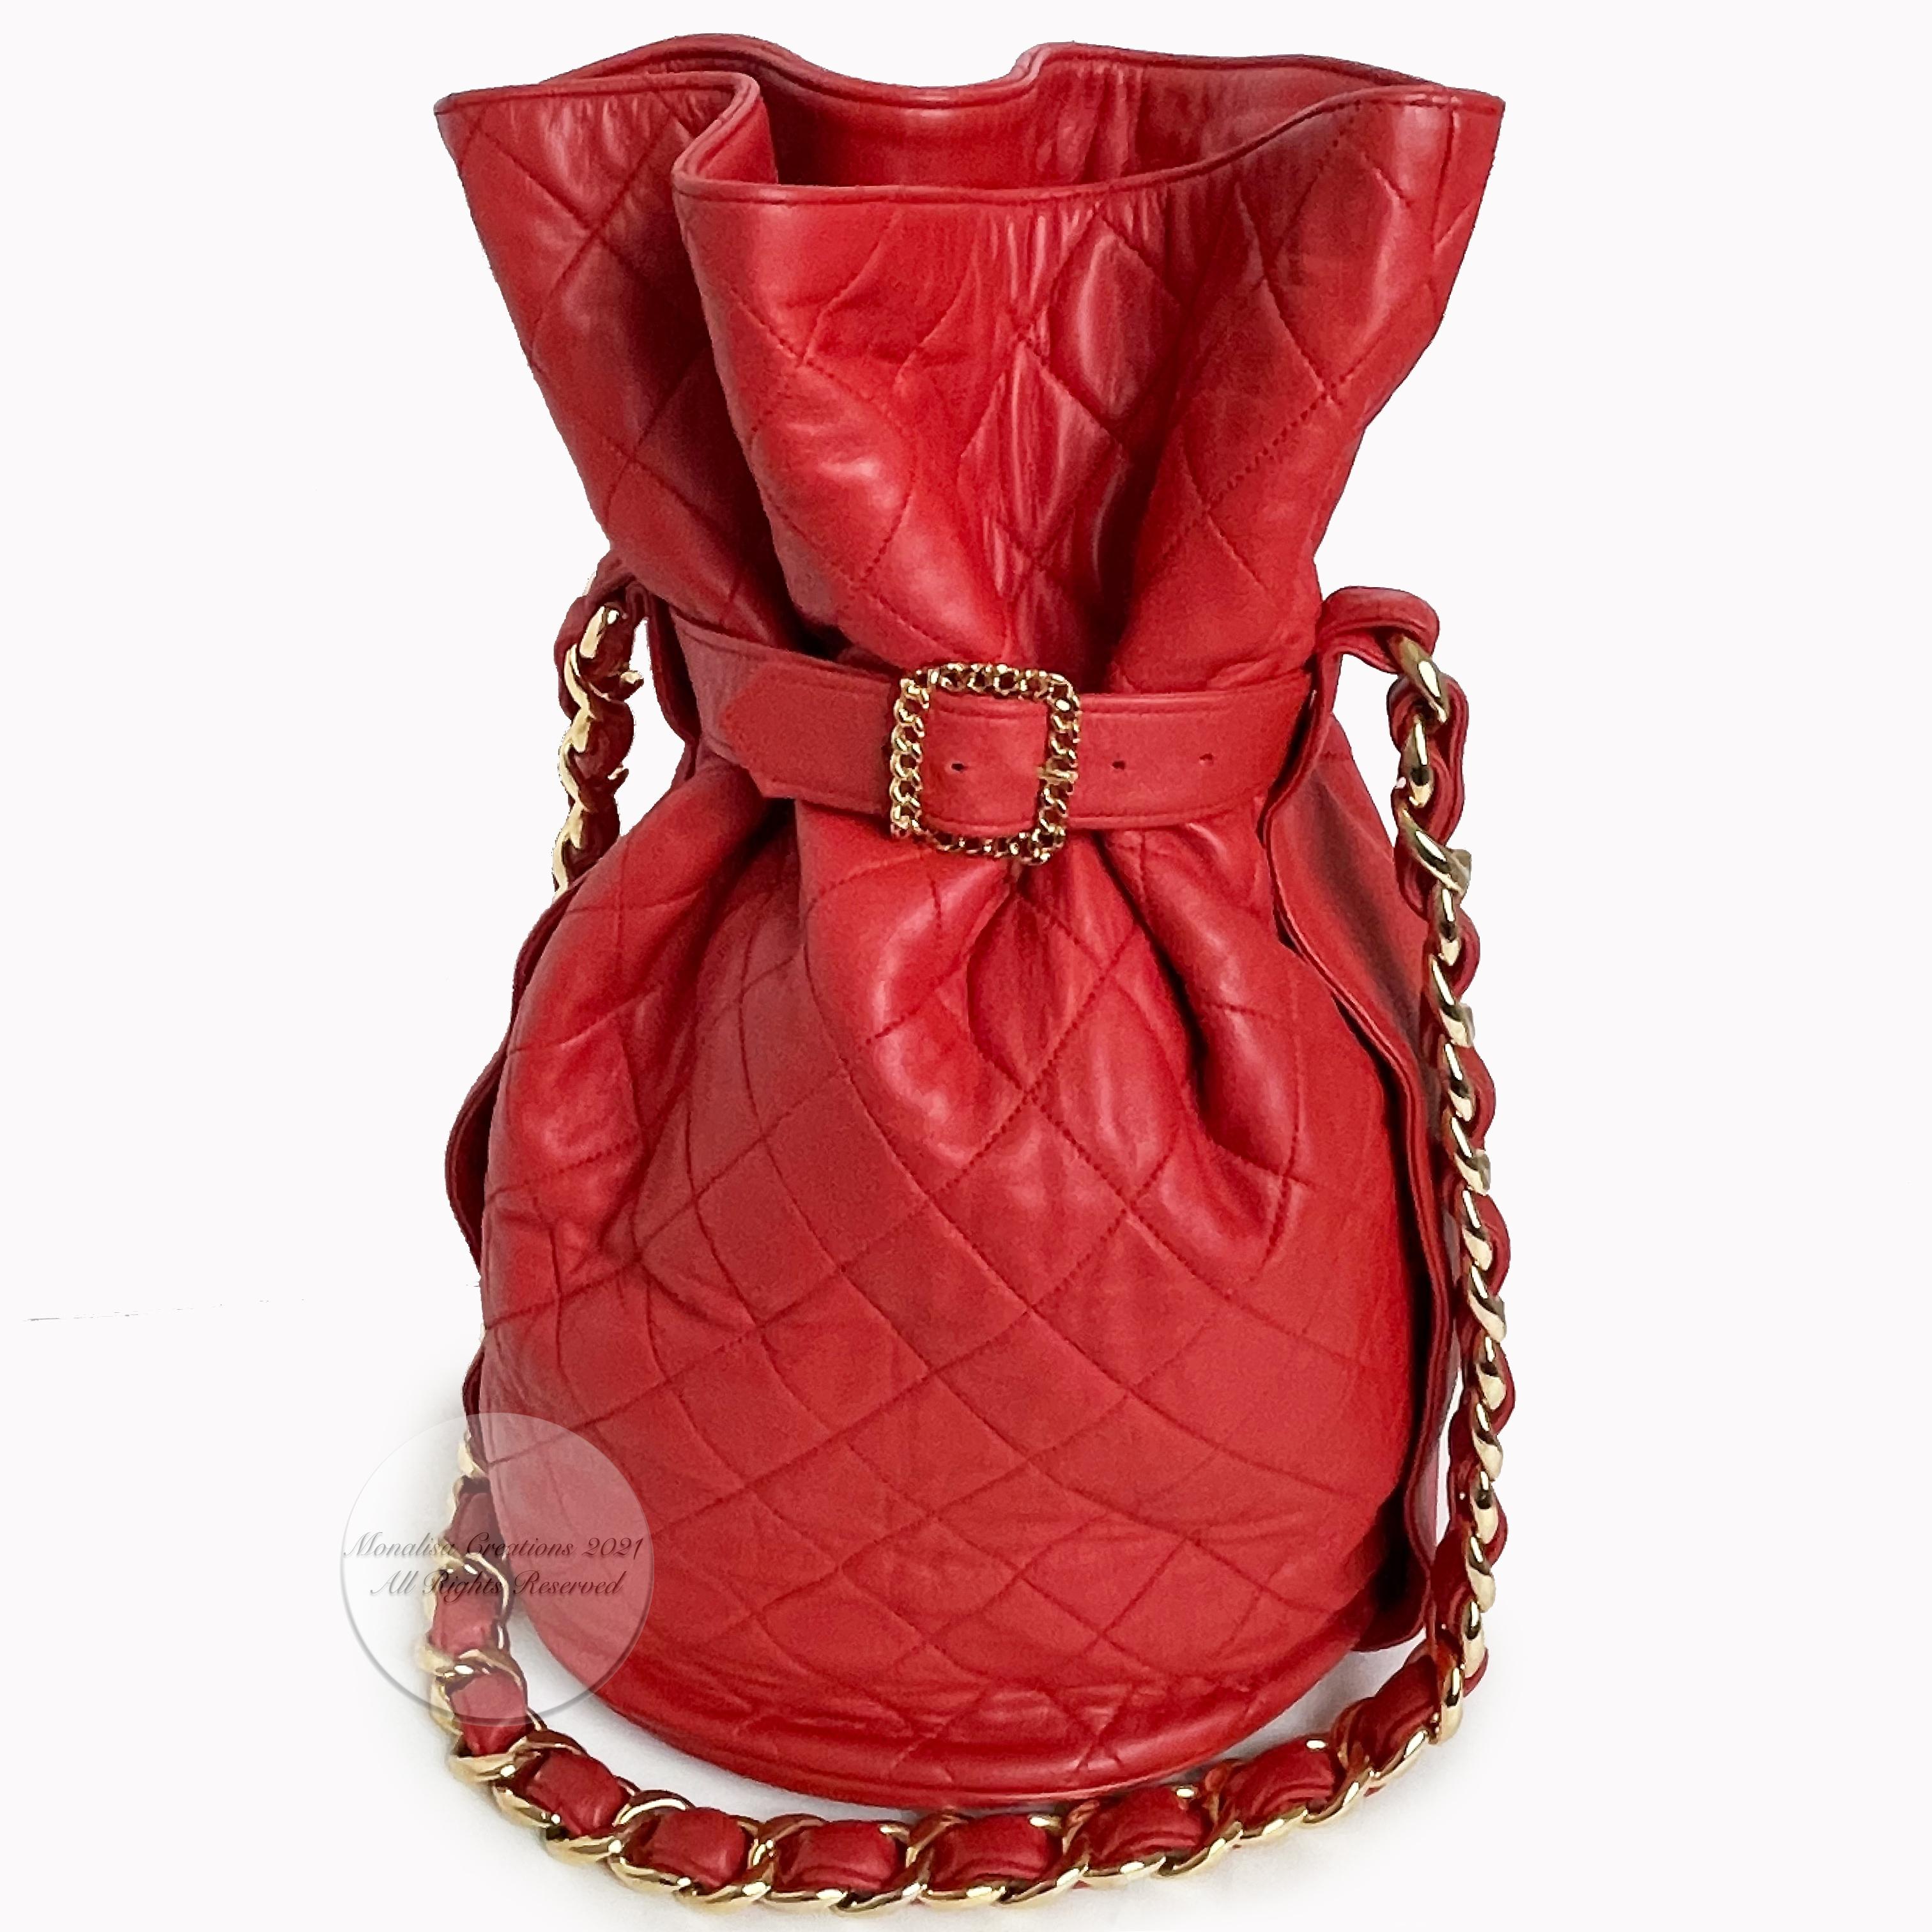 Vintage Chanel Buckle Bag Red Matelasse Leather with Chain Strap F/W 1992 Rare For Sale 3